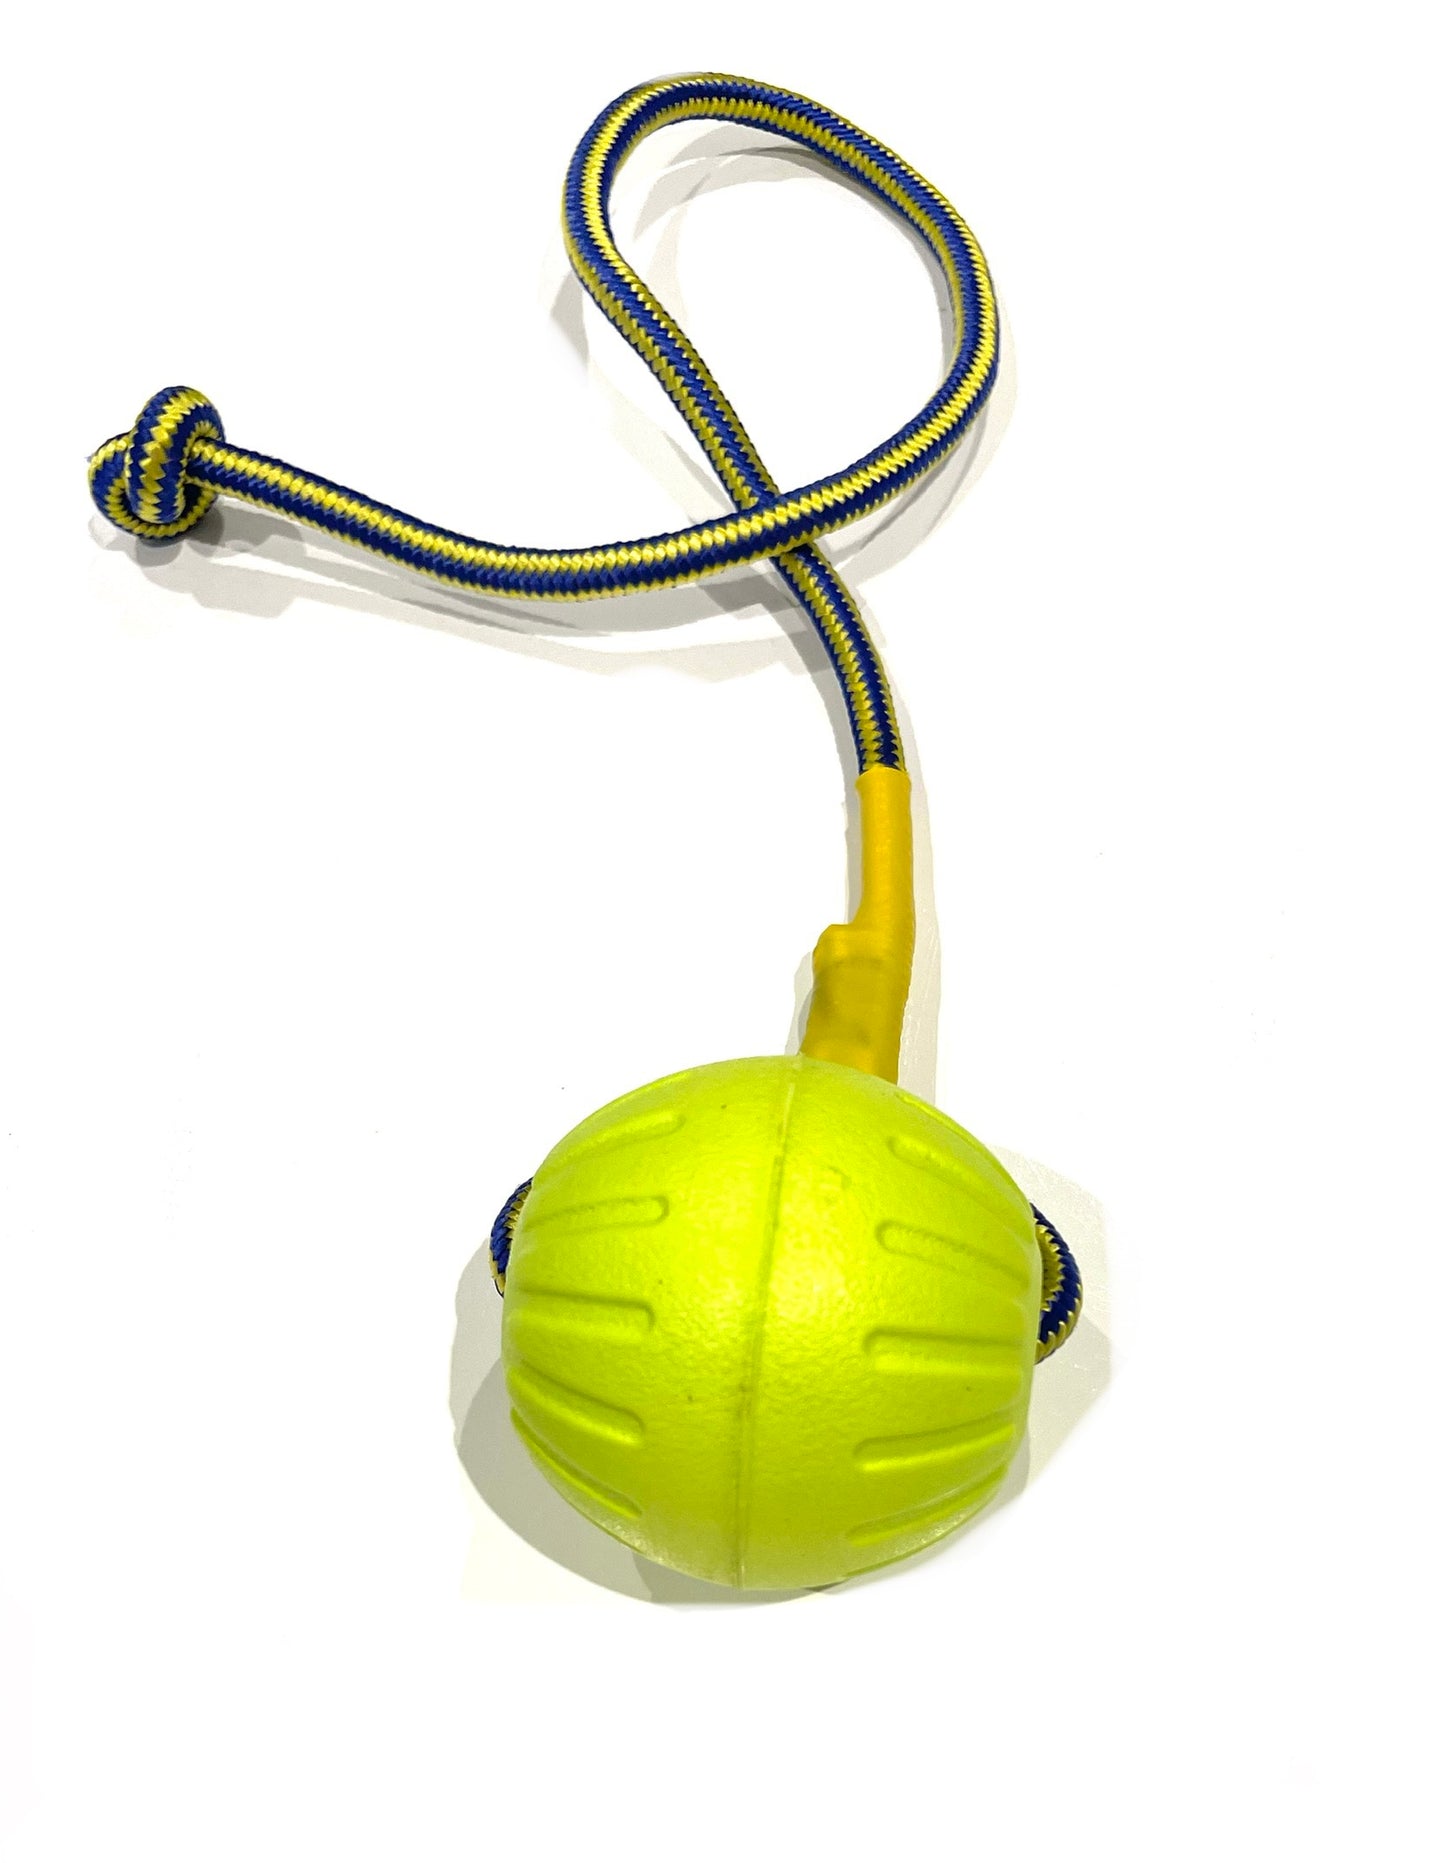 Ball on rope